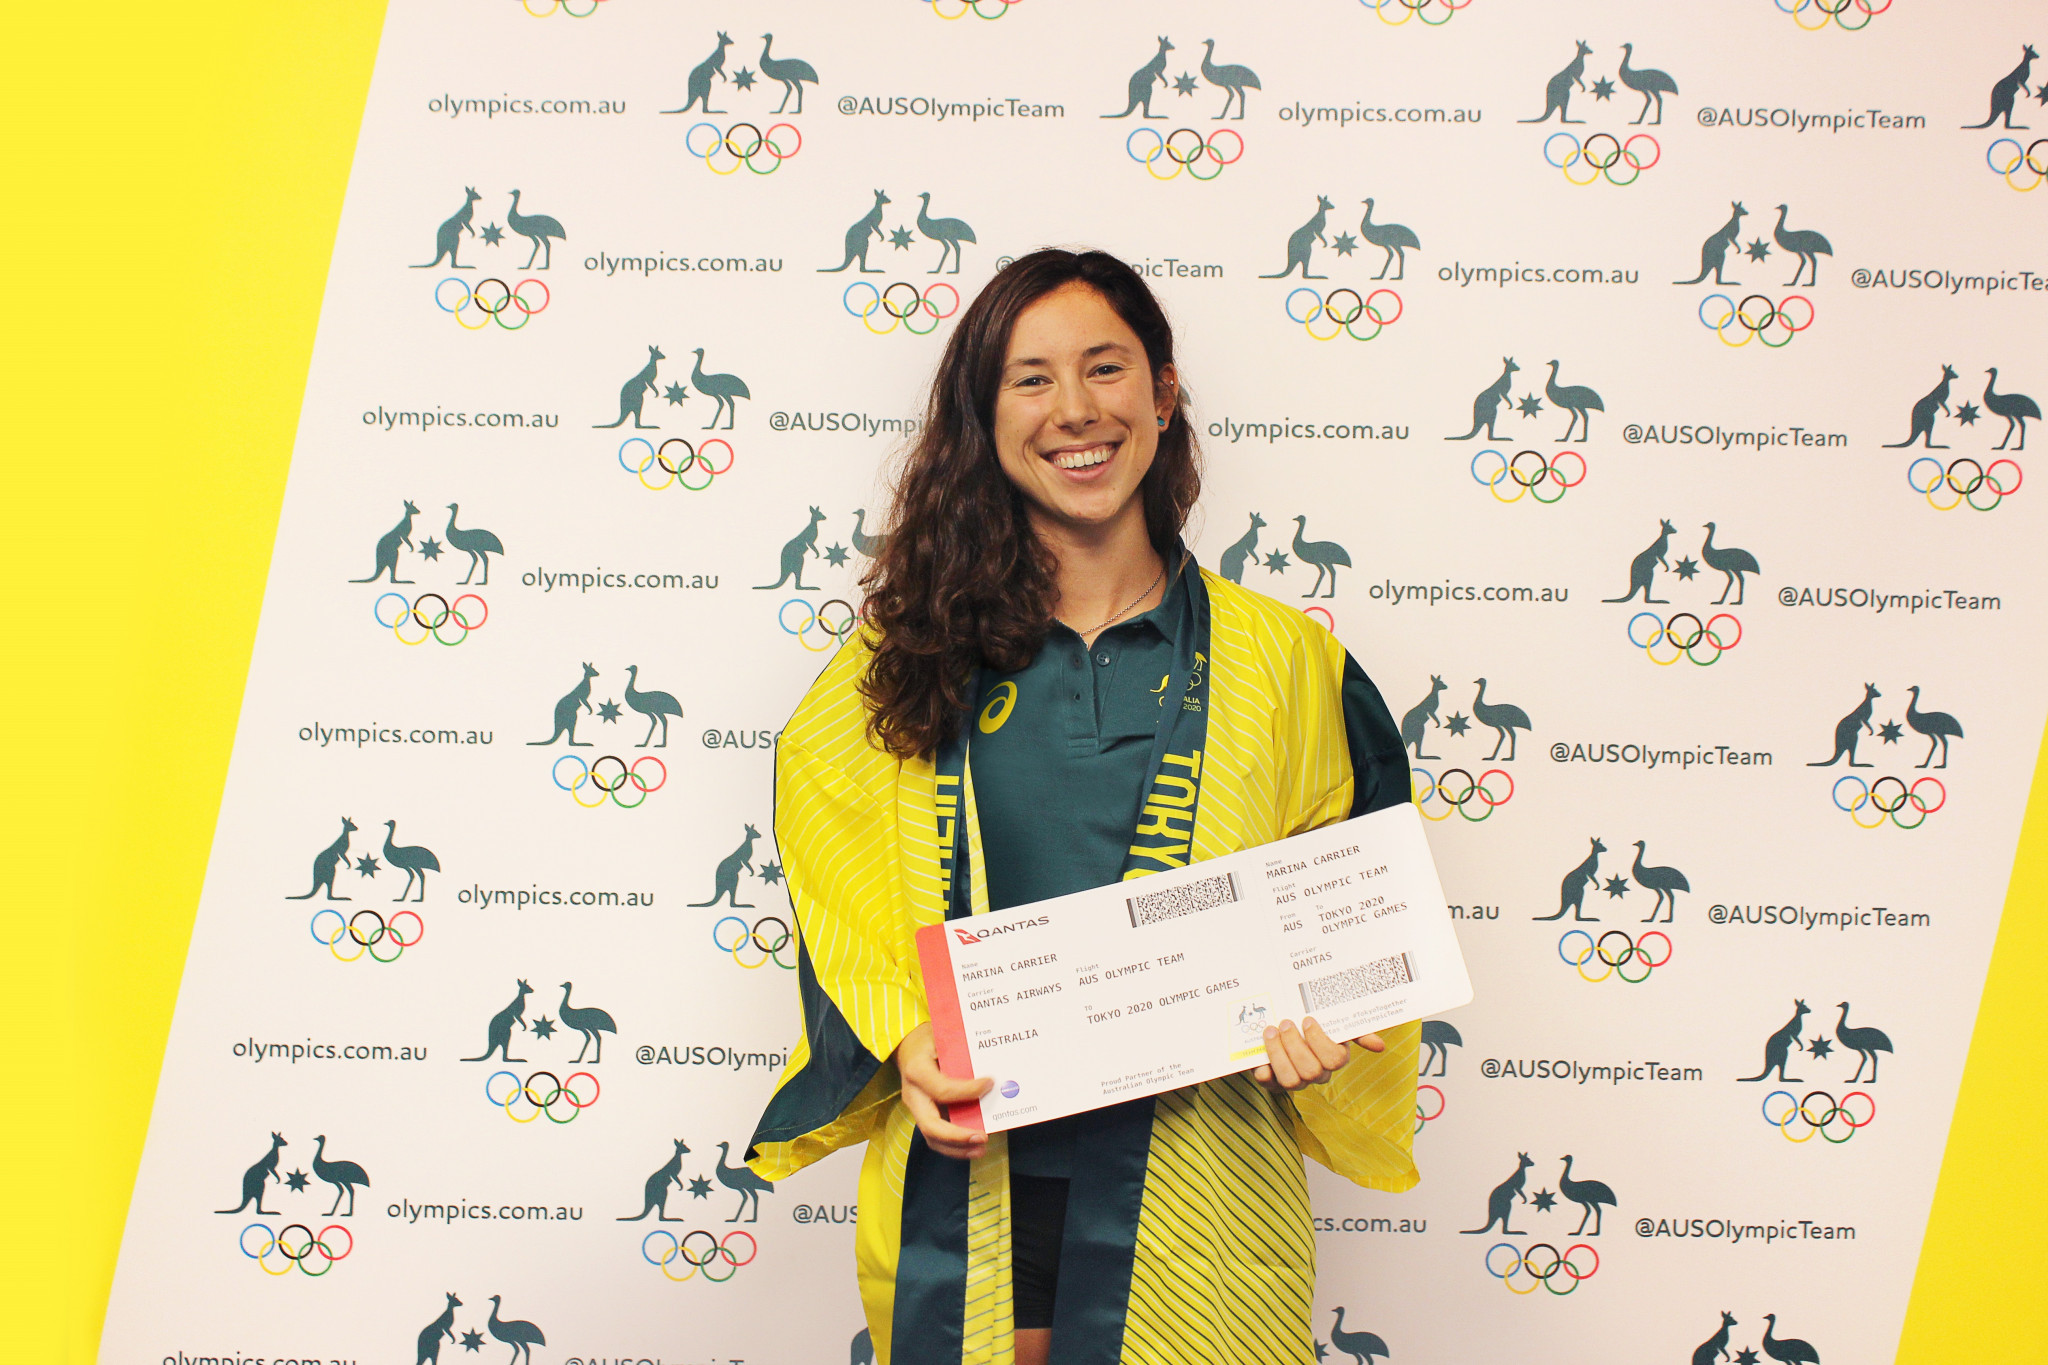 Marina Carrier is the seventh athlete to be named on Australia's Olympic team for Tokyo 2020 ©AOC